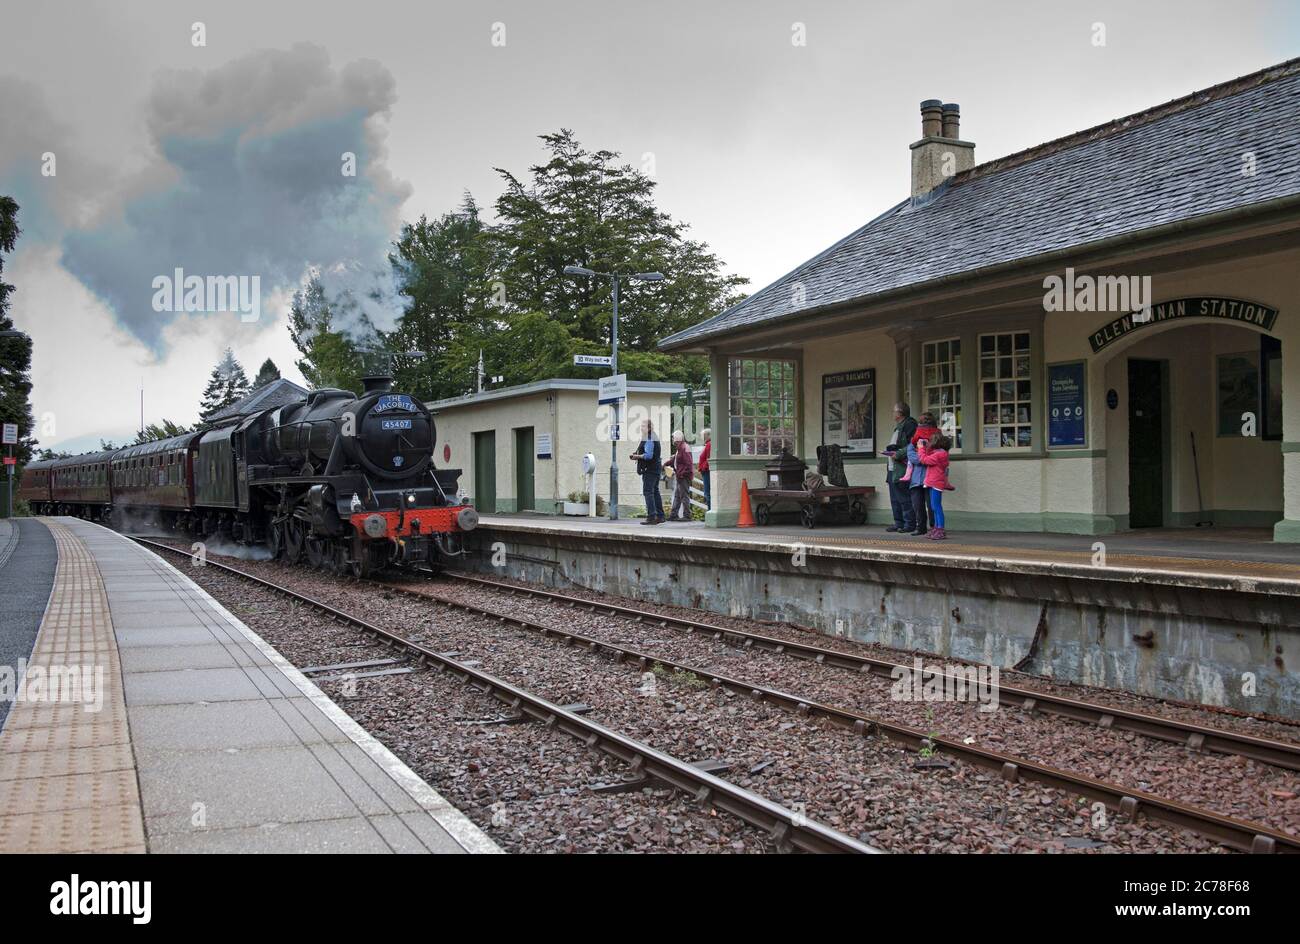 Jacobite Steam Train, Lochaber, Scotland, UK. Glenfinnan Station, 15 July 2020. The delayed service of the Jacobite Steam Train due to the Covid-19 Coronavirus Lockdown runs for the first time in 2020. This 84 mile round trip winds past a list of impressive scenic and historic views. Pictured: Steam train entering Glenfinnan Railway  Station. The service would normally begin its Easter Service around 30th March but  due to the pandemic it had to be postponed until the Scottish Government decided it was safe to move into Phase 3. Stock Photo